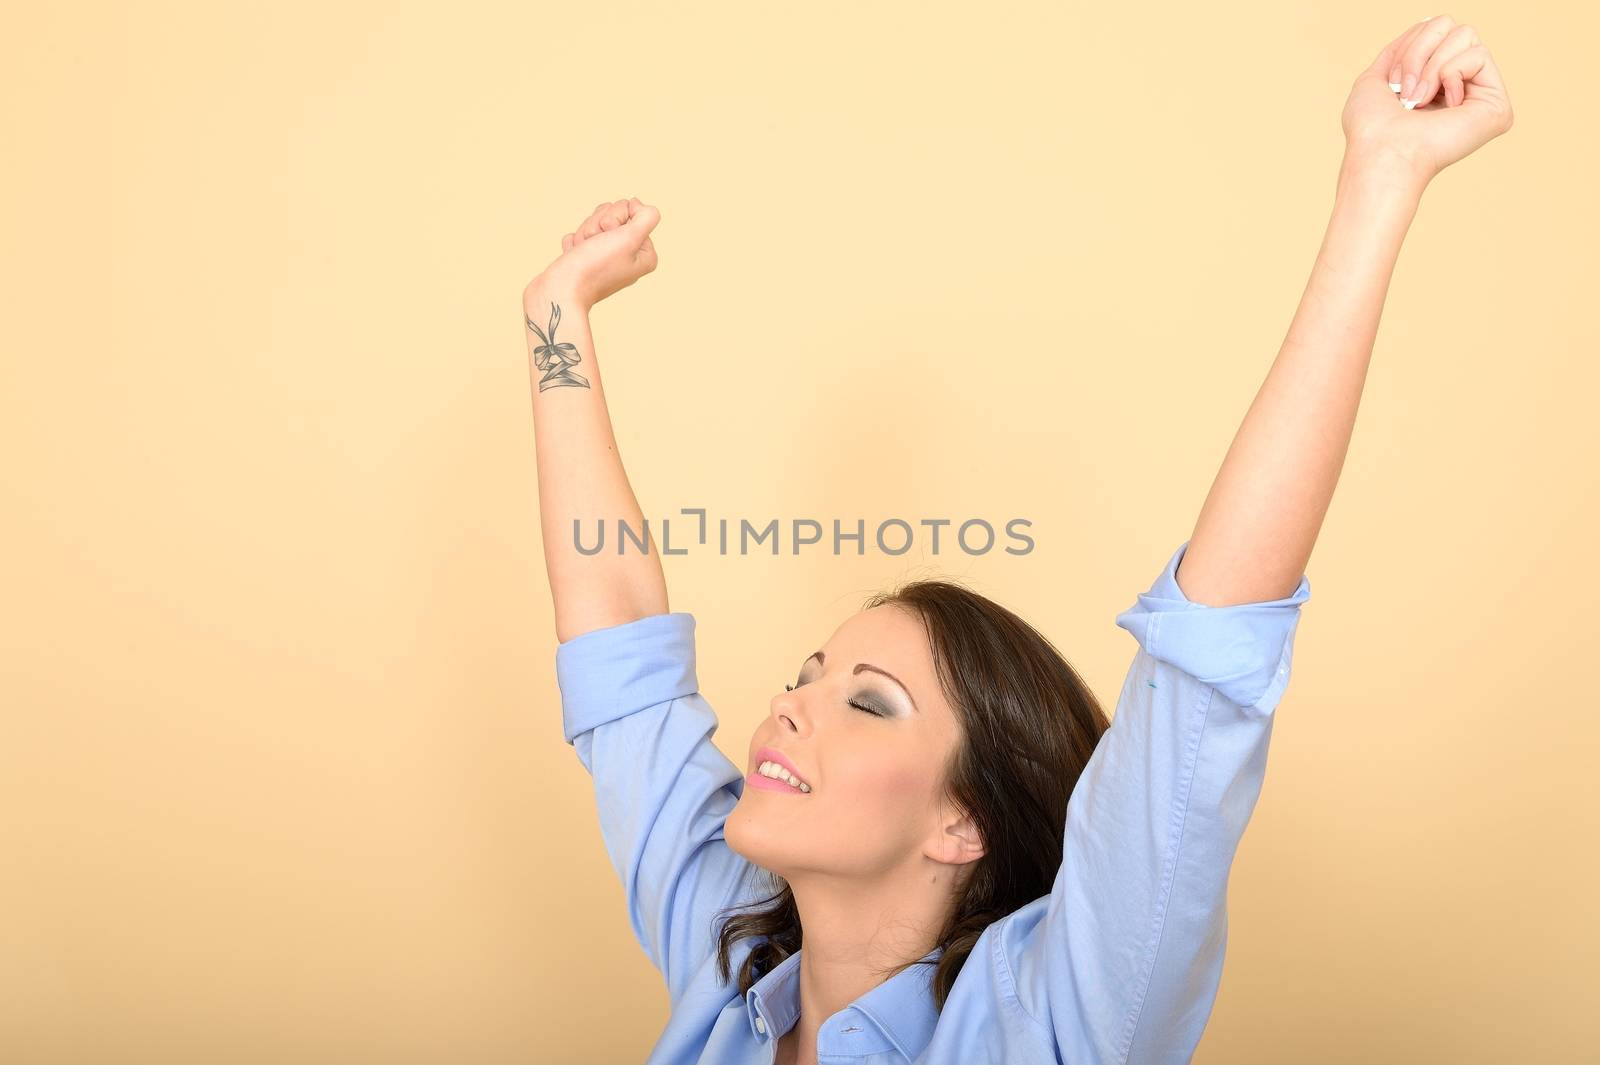 Attractive Young Woman Sitting on the Floor Wearing a Blue Shirt and White Jeans Raising Her Hands in Excitement